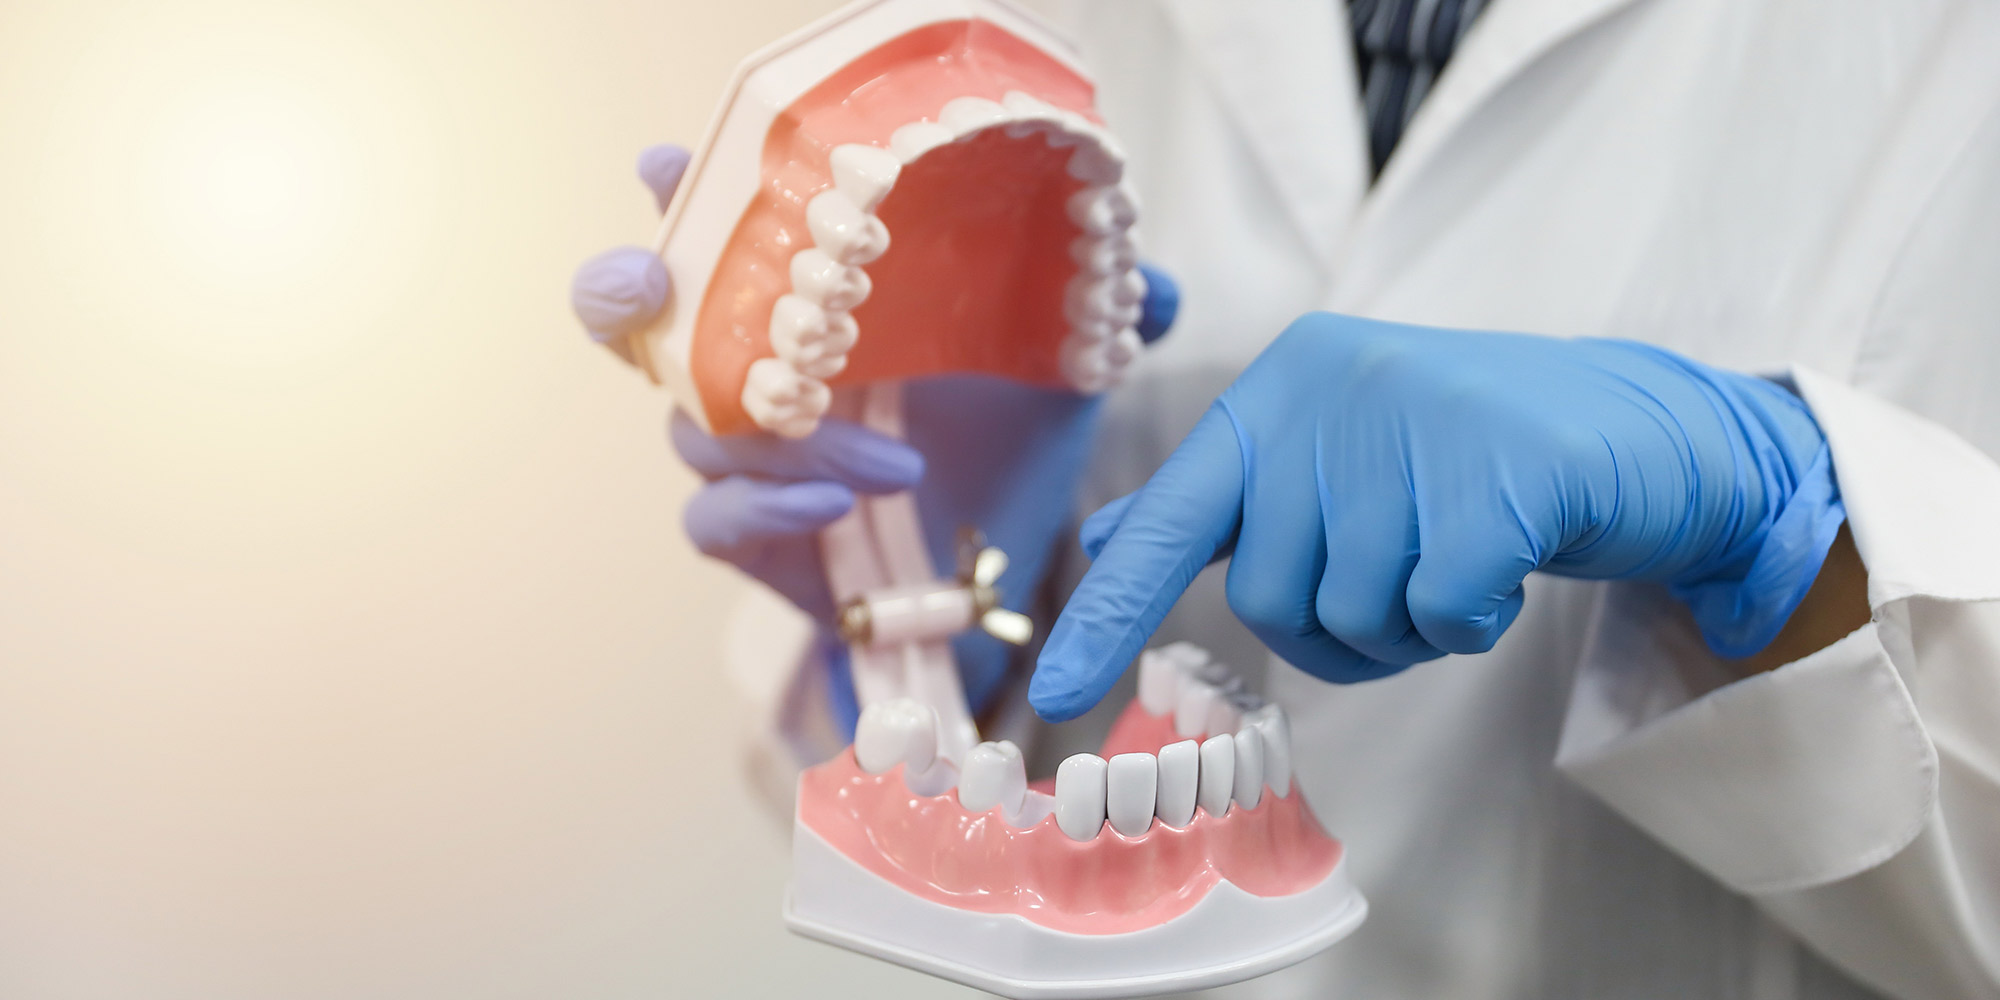 Dentist holding model of mouth pointing to missing tooth